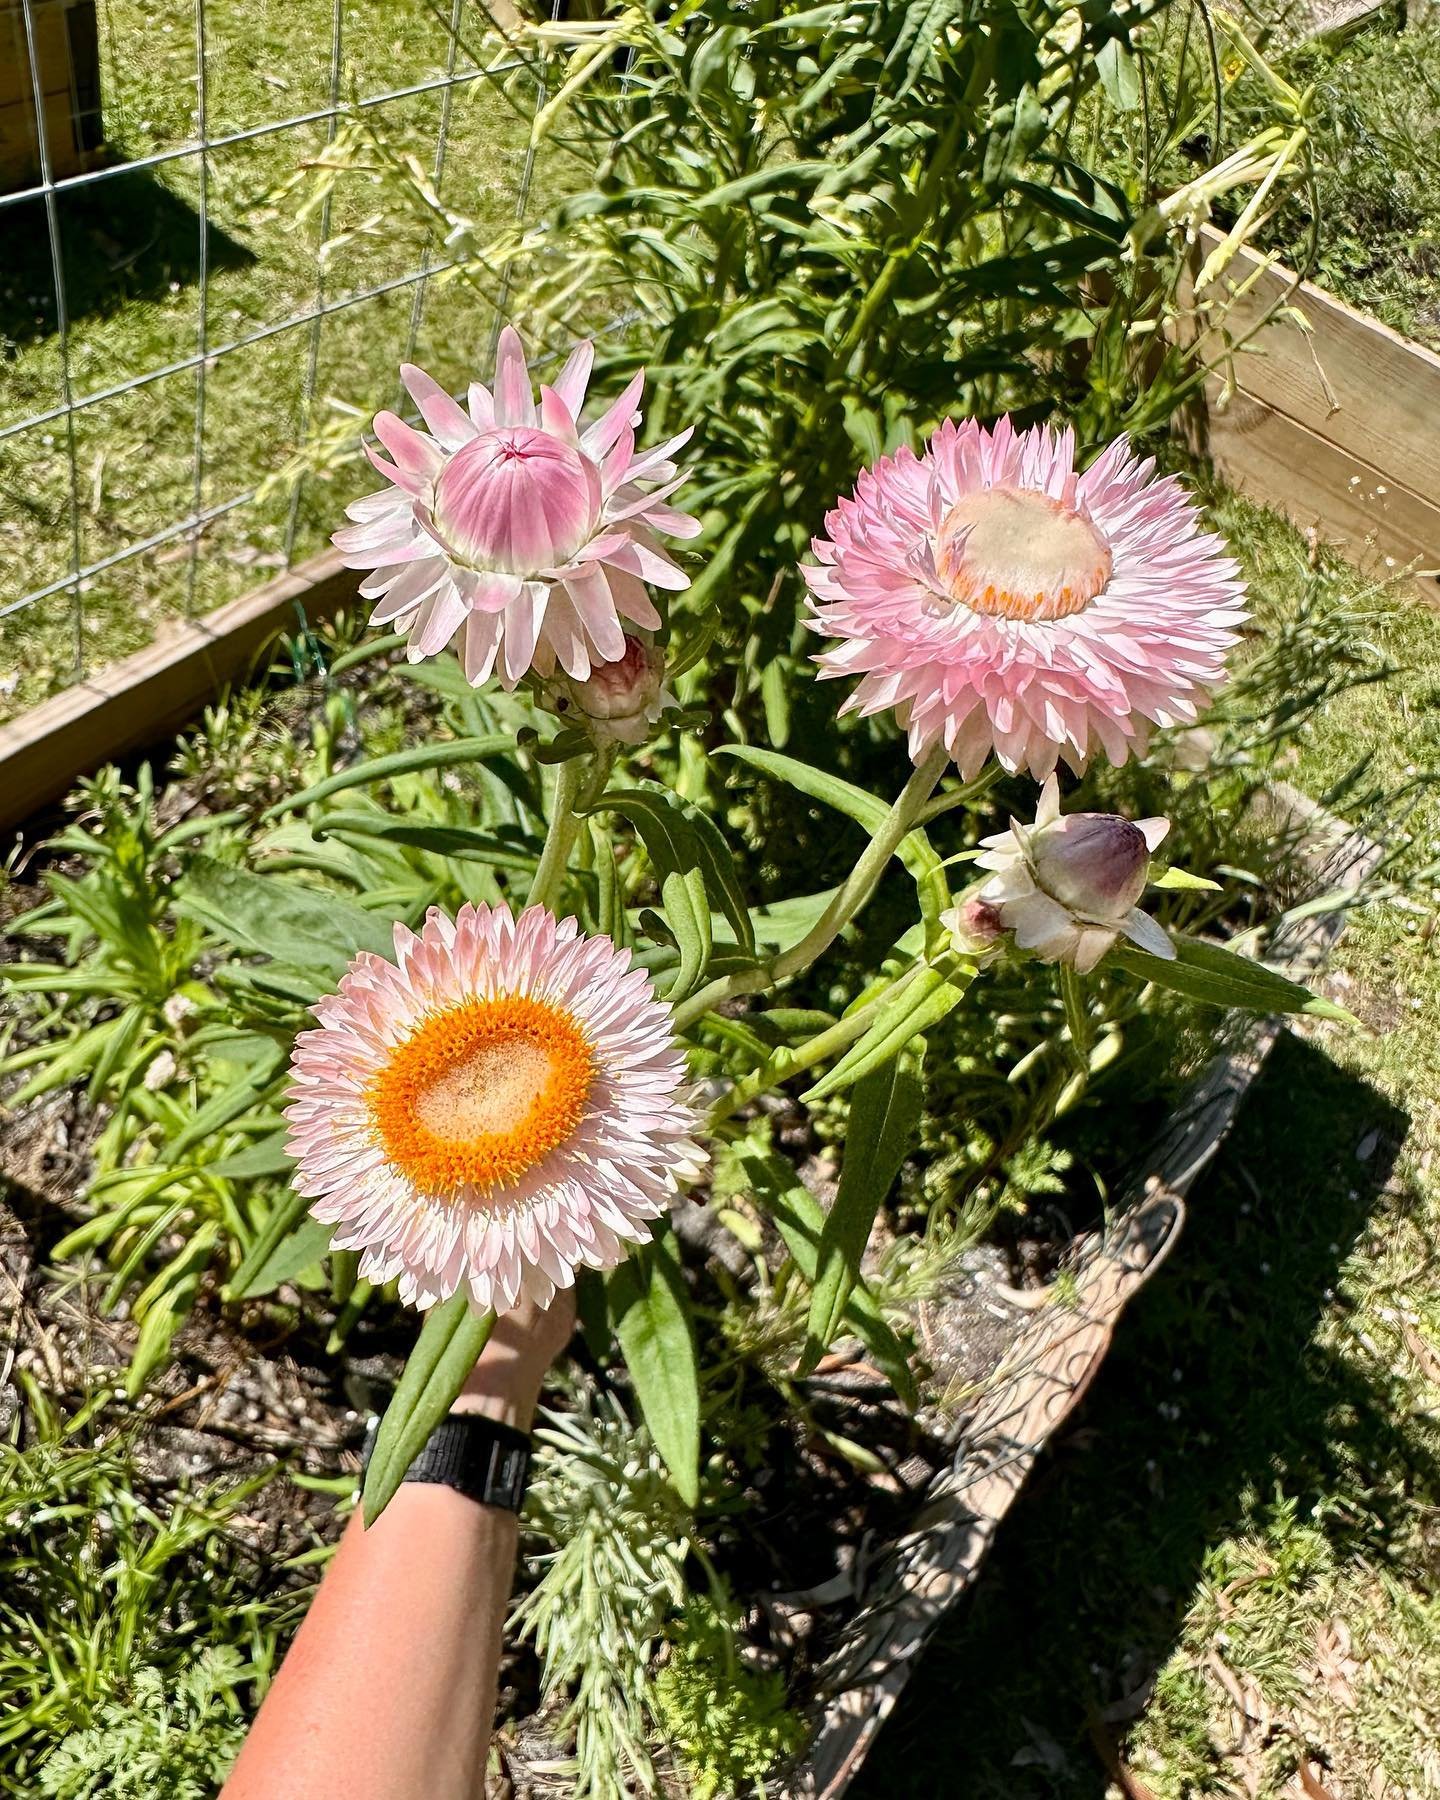 I finally was able to grow these strawflowers and I ❤️ them!! Probably my favorite flower I&rsquo;ve grown so far.